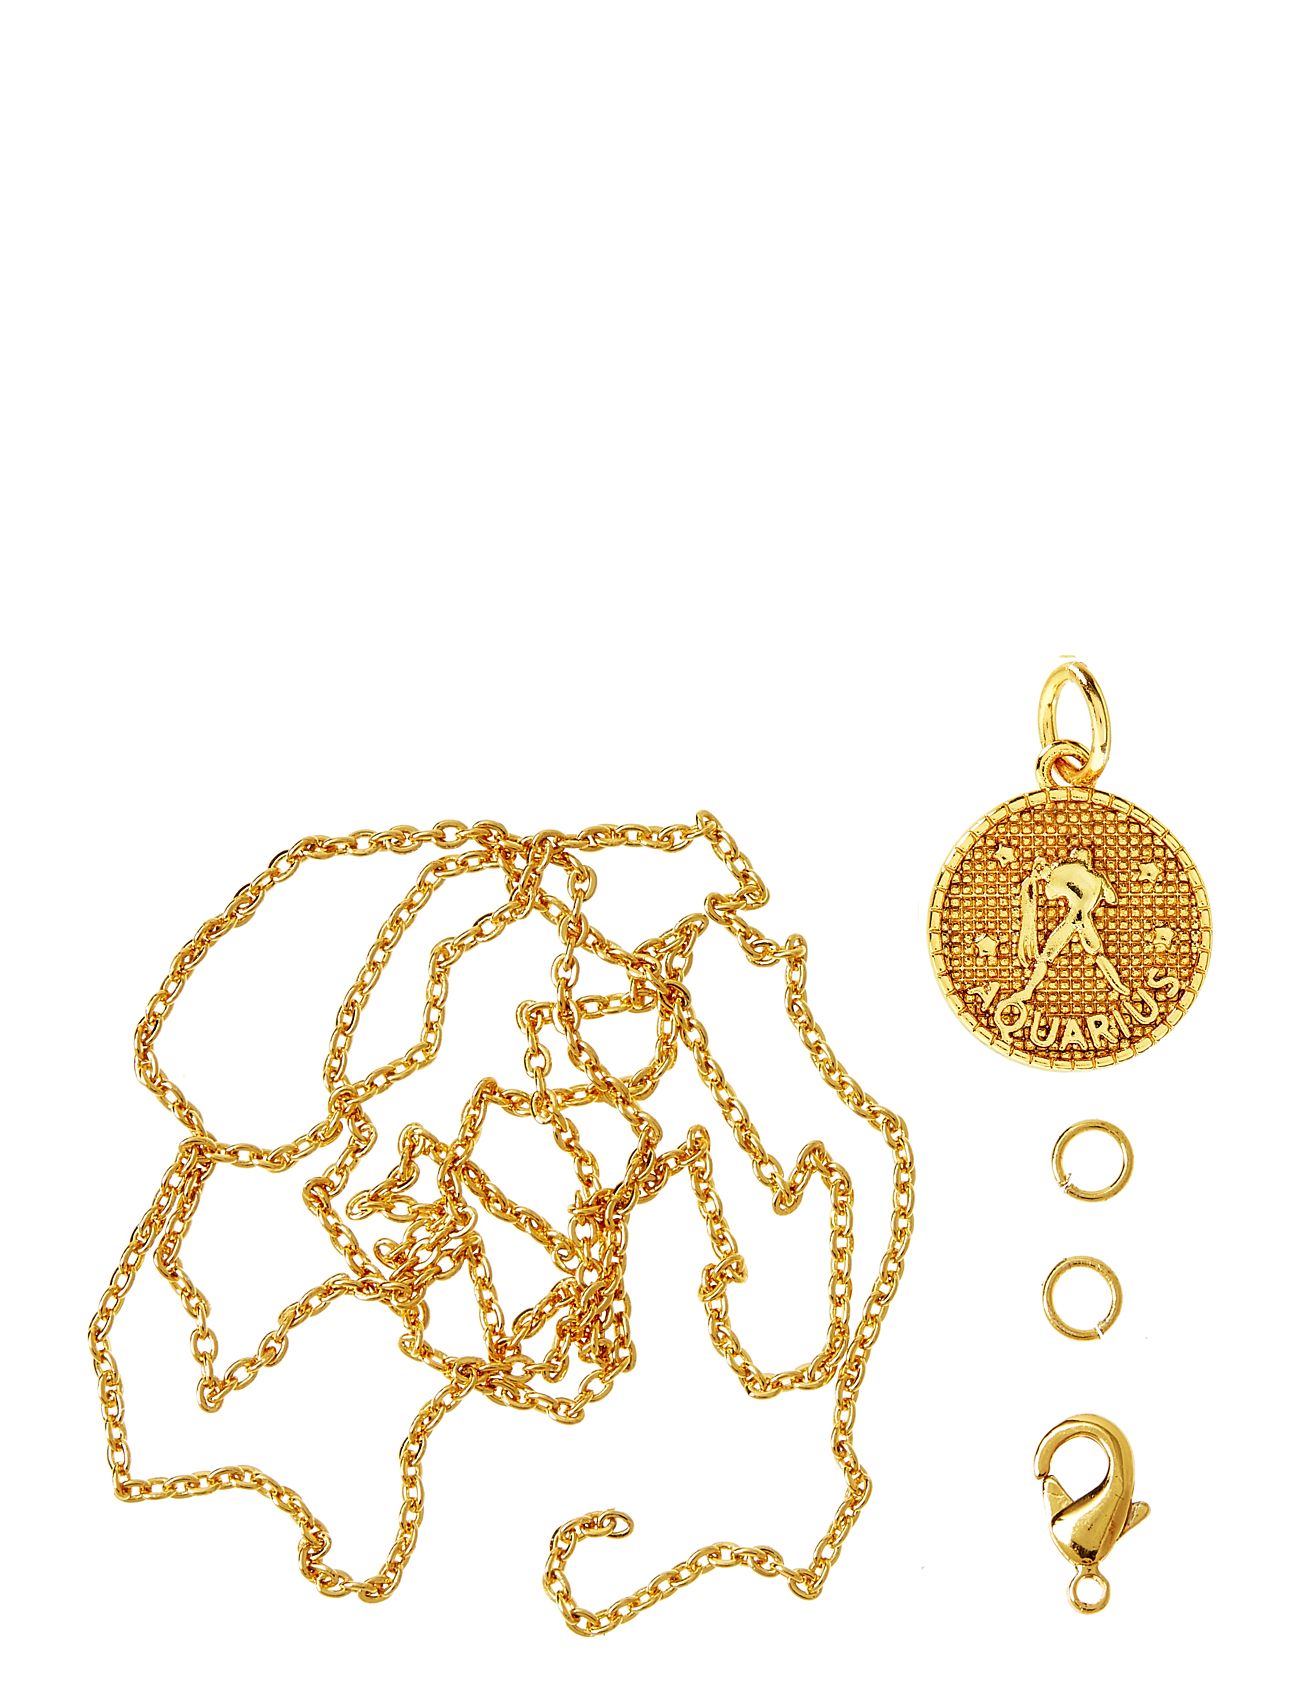 Zodiac Coin Pendant And Chain Set, Aquarius Toys Creativity Drawing & Crafts Craft Jewellery & Accessories Gold Me & My Box